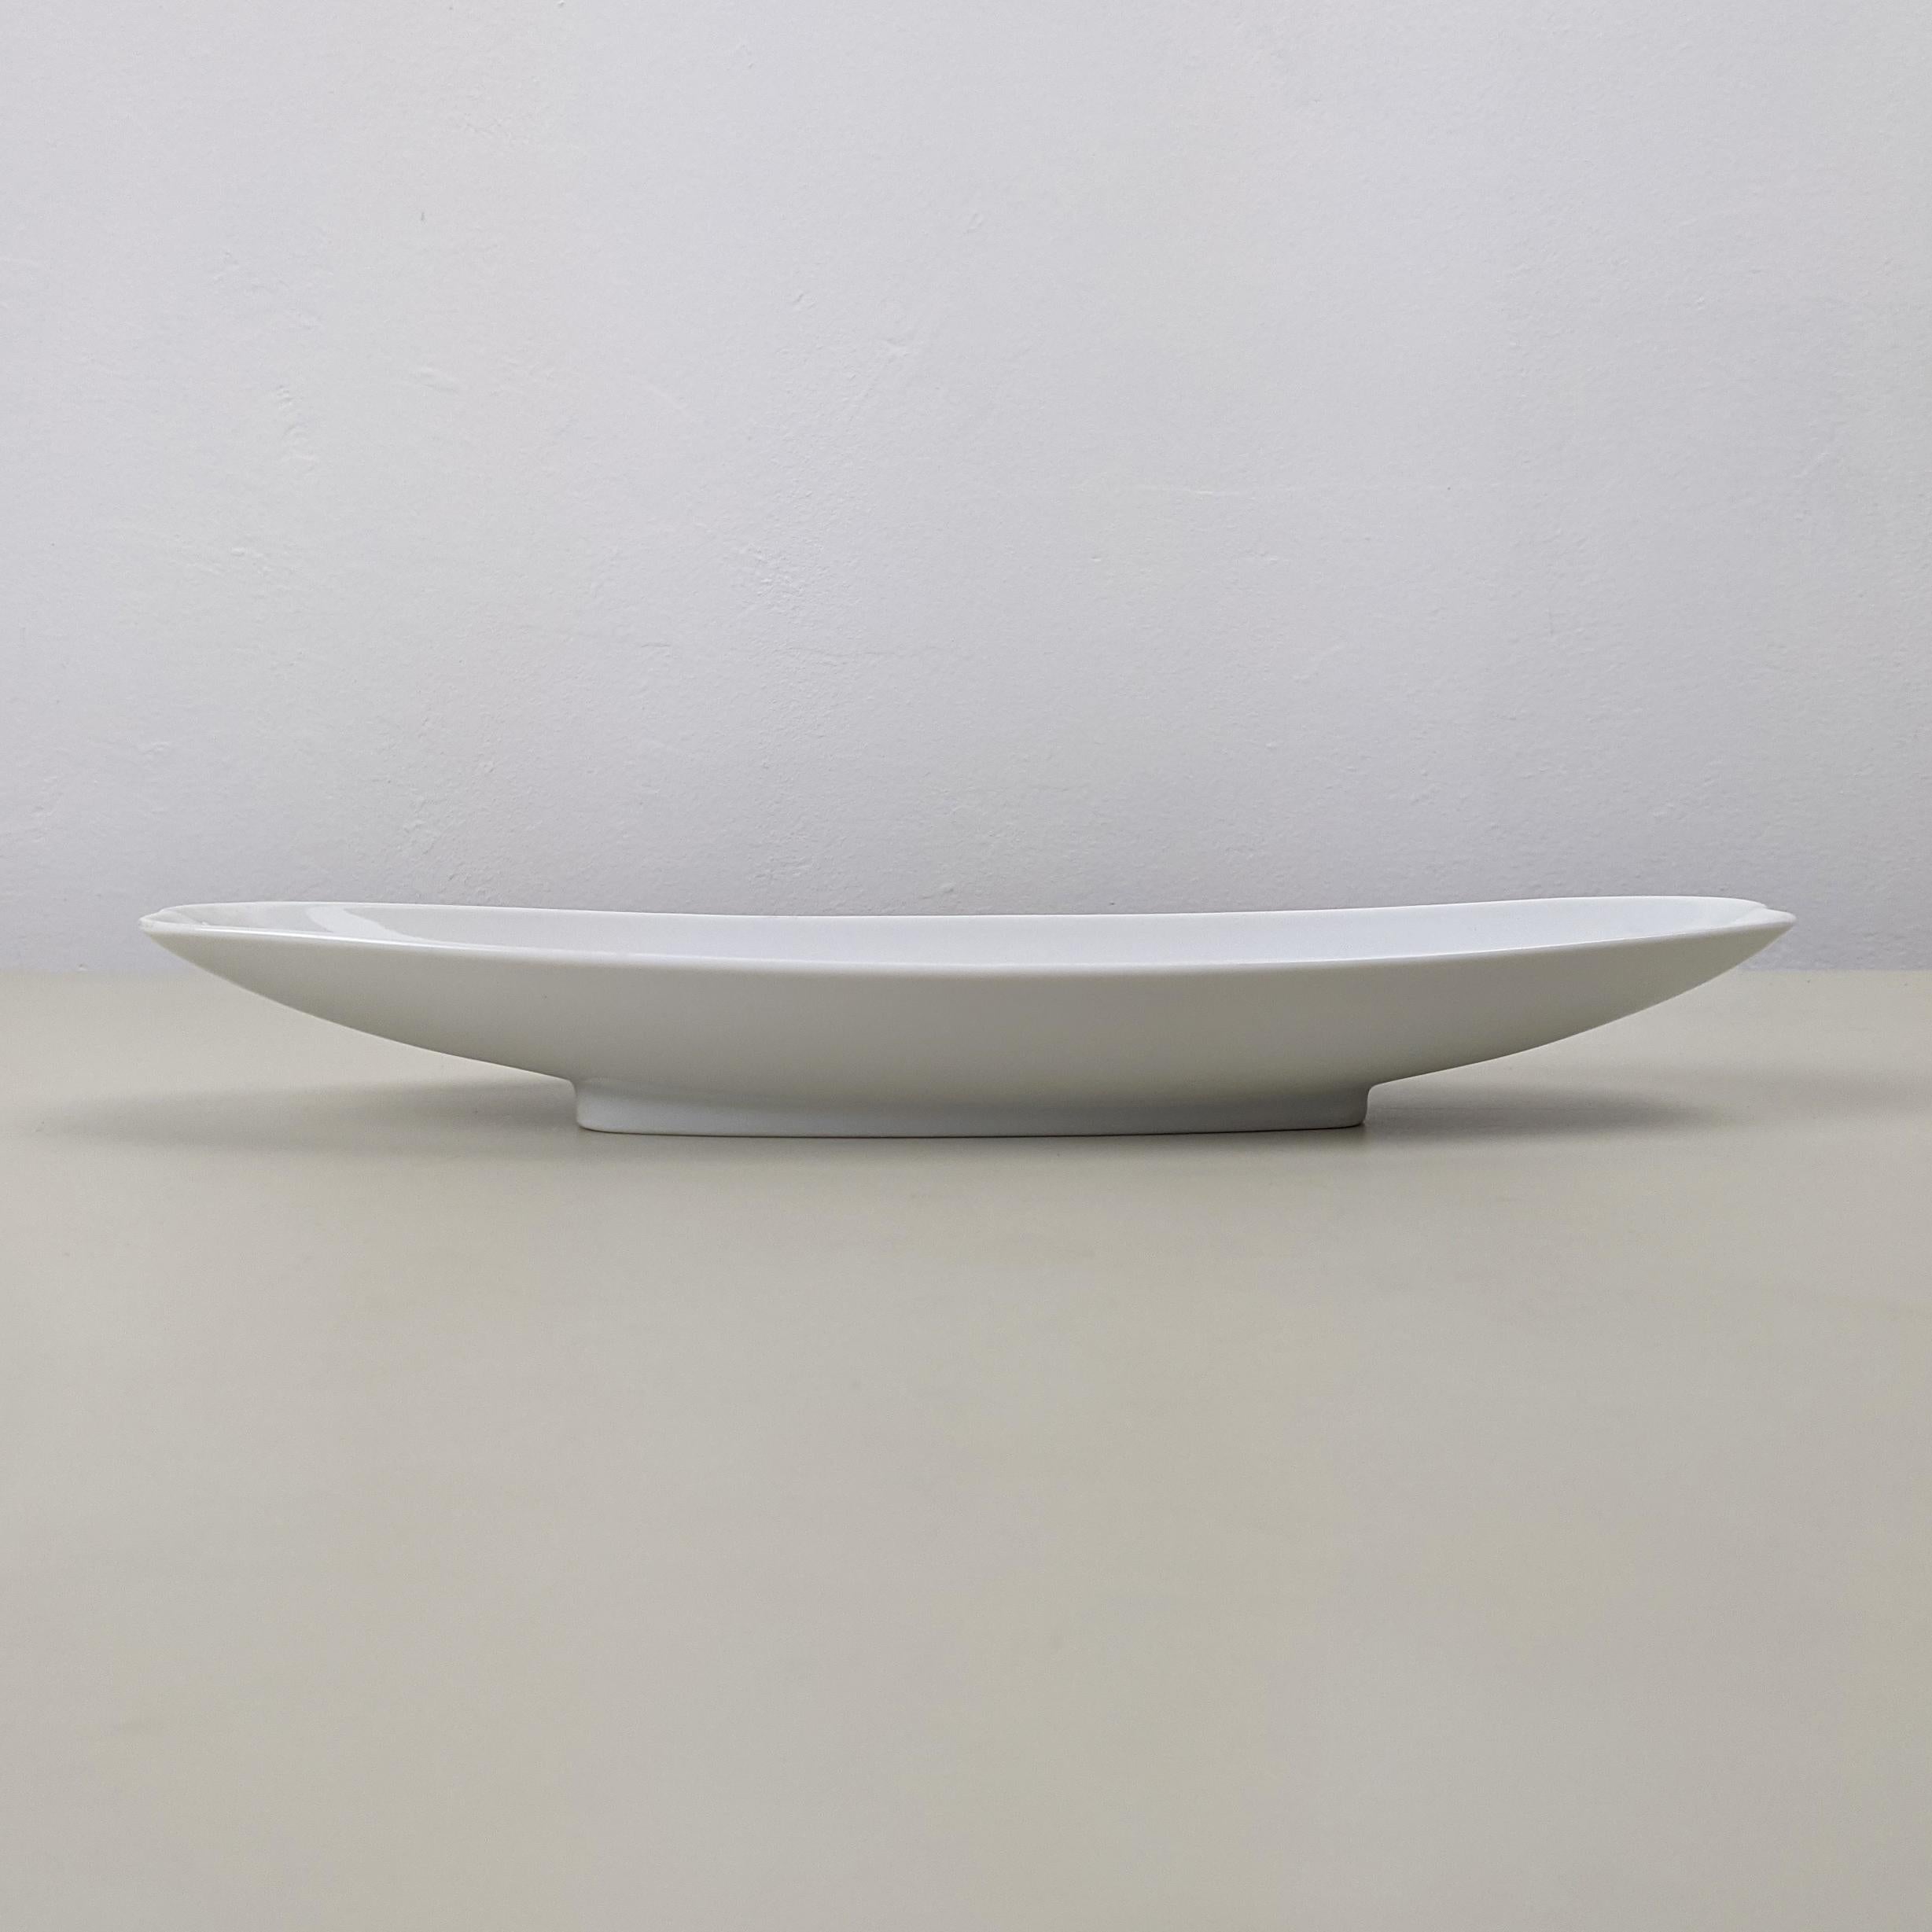 Tapio Wirkkala for Rosenthal, c. 1970
‘Karelia’ leaf-pattern dish

White porcelain
Very good condition with only very minor marks

Dimensions, approx..:
lenght 28cm, width 9cm, height 3.7cm, weight 250g.